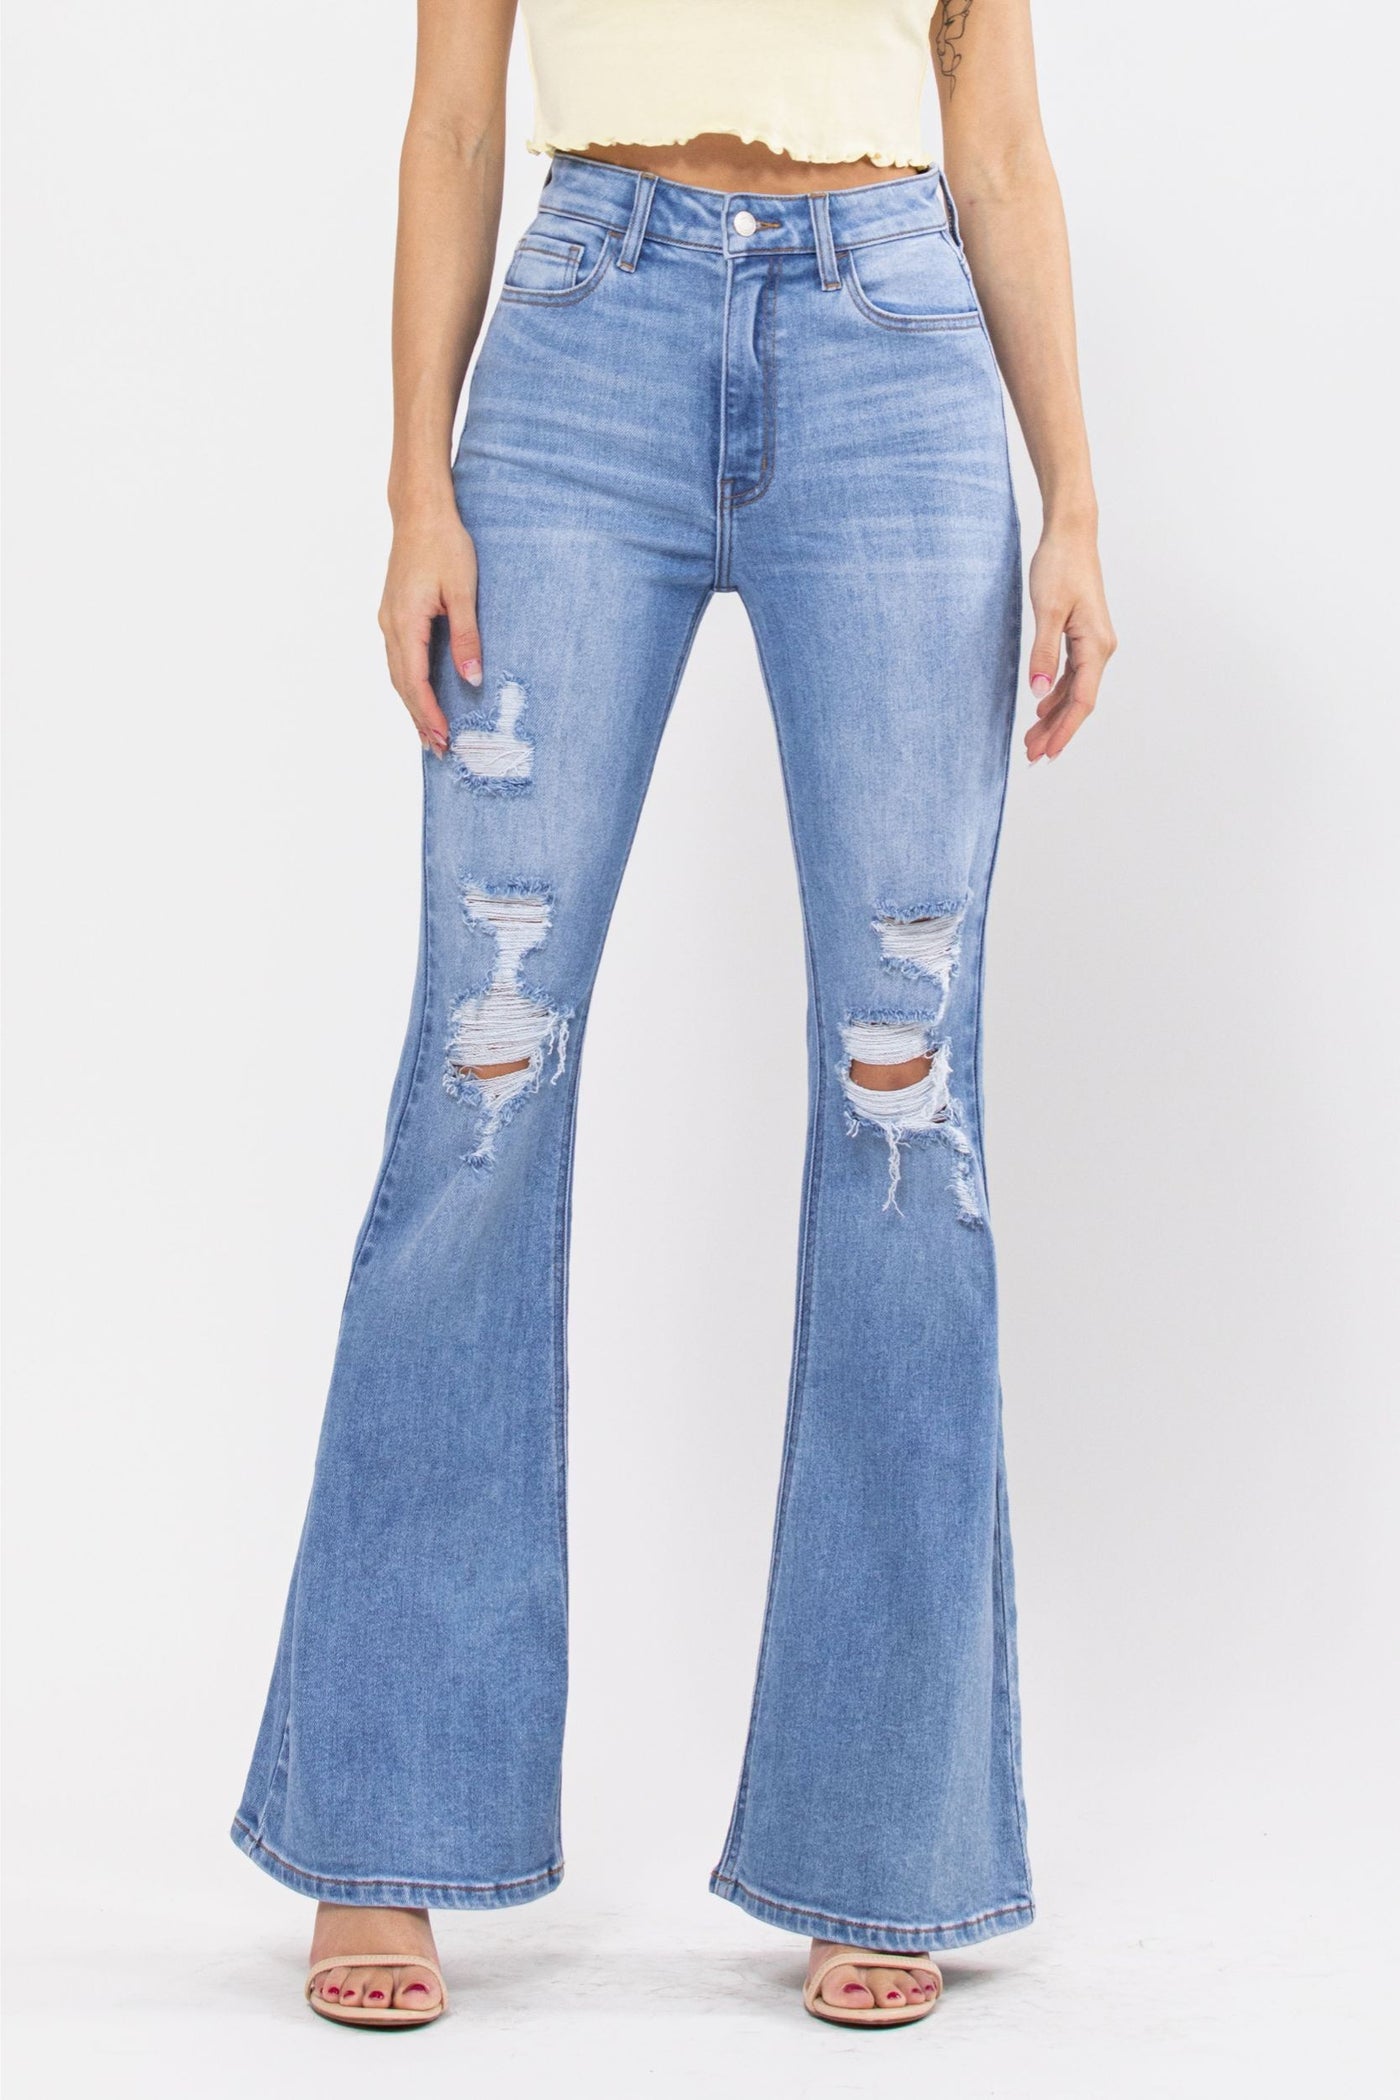 Frizzle Distressed Jeans